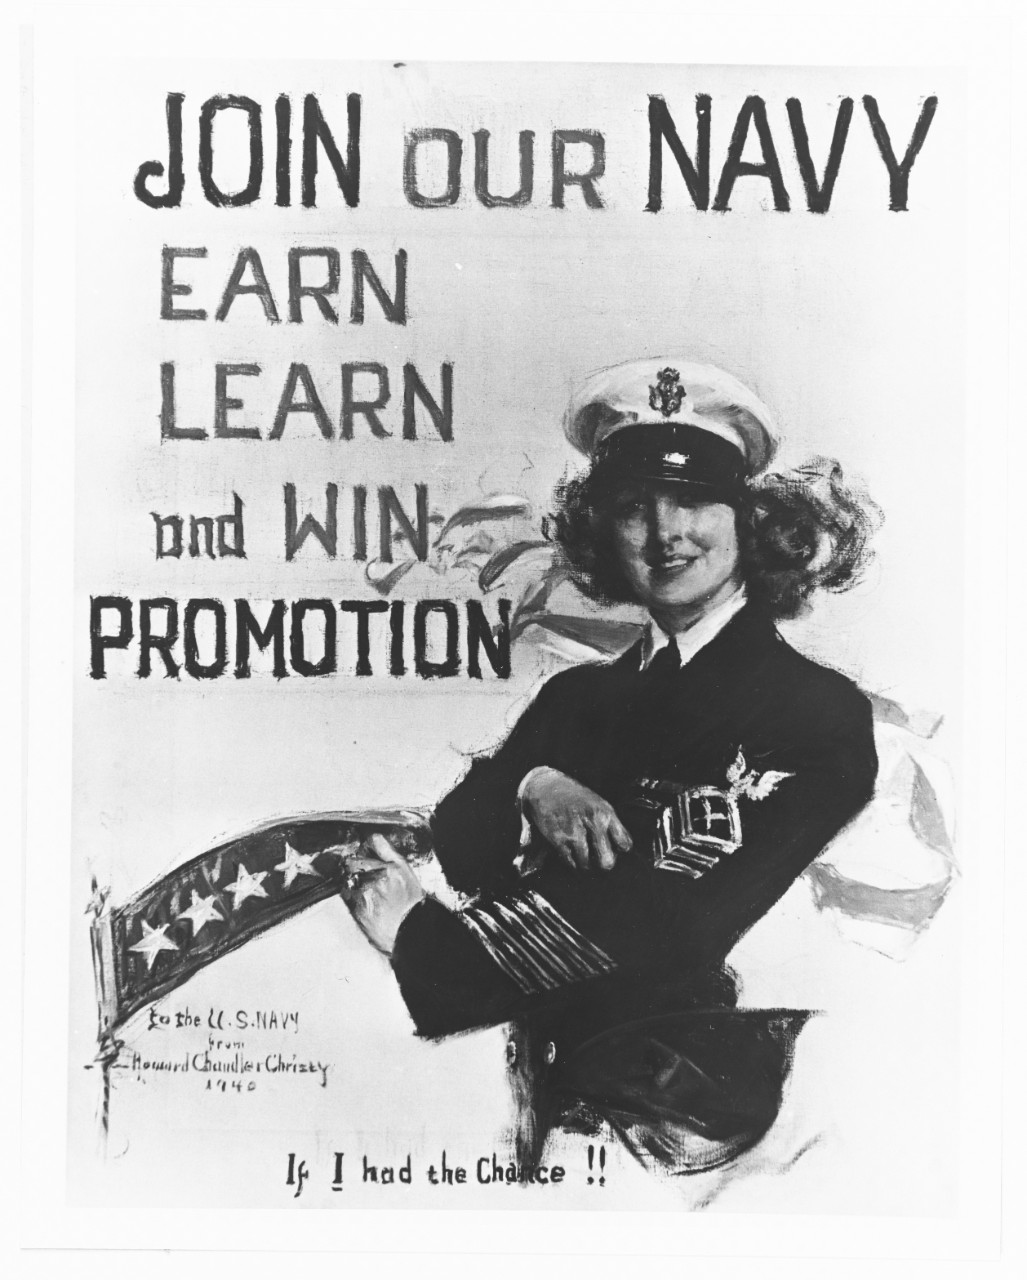 Navy poster, "Join our Navy"